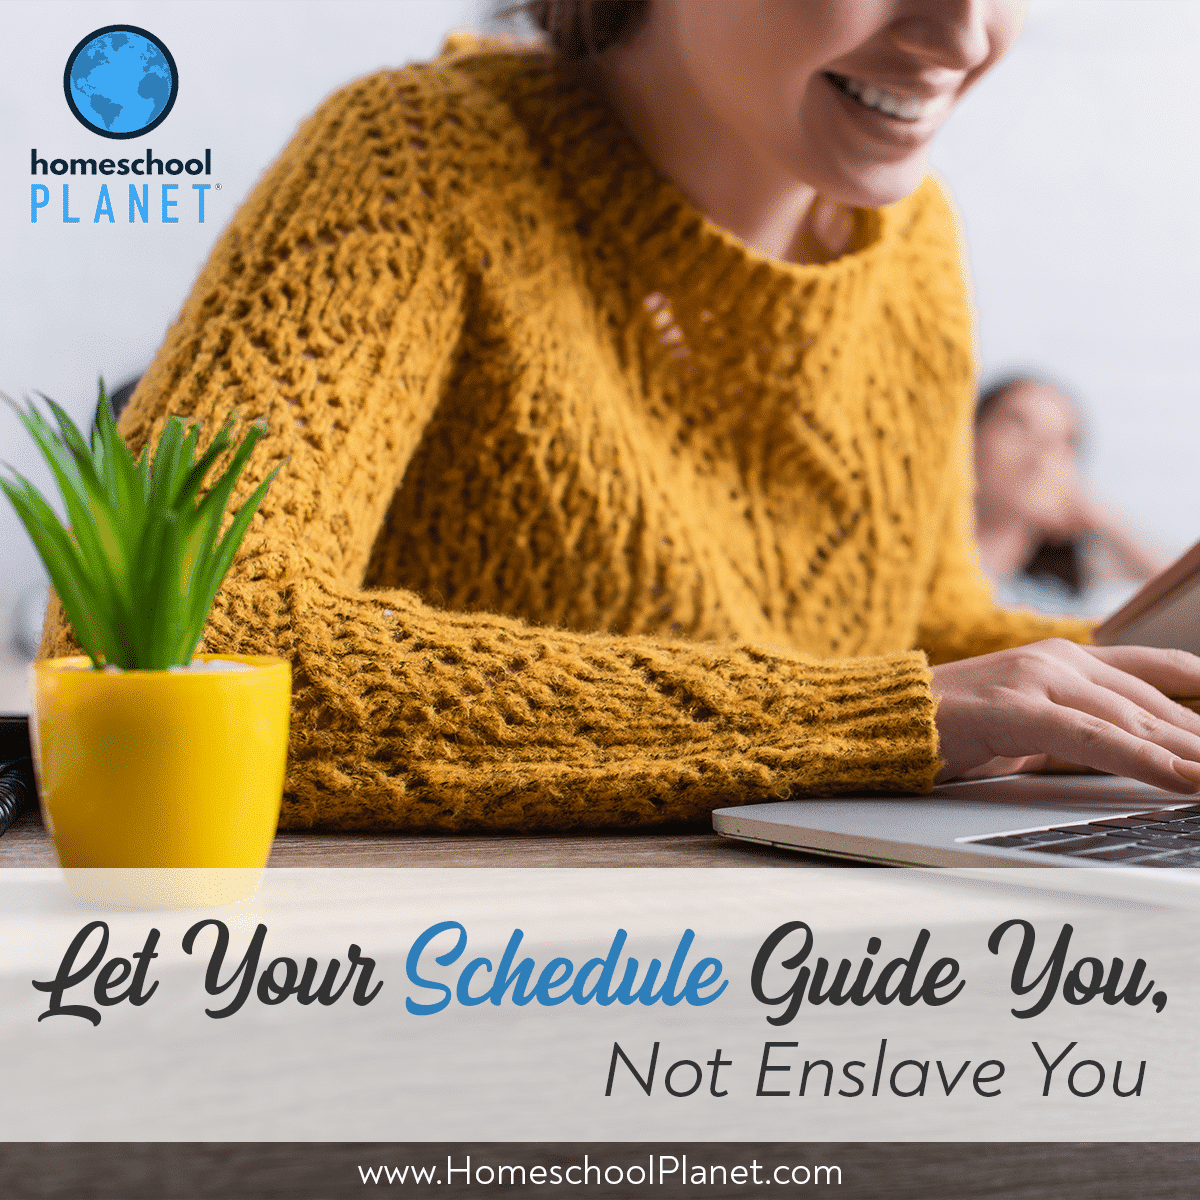 Let Your Schedule Guide You, Not Enslave You